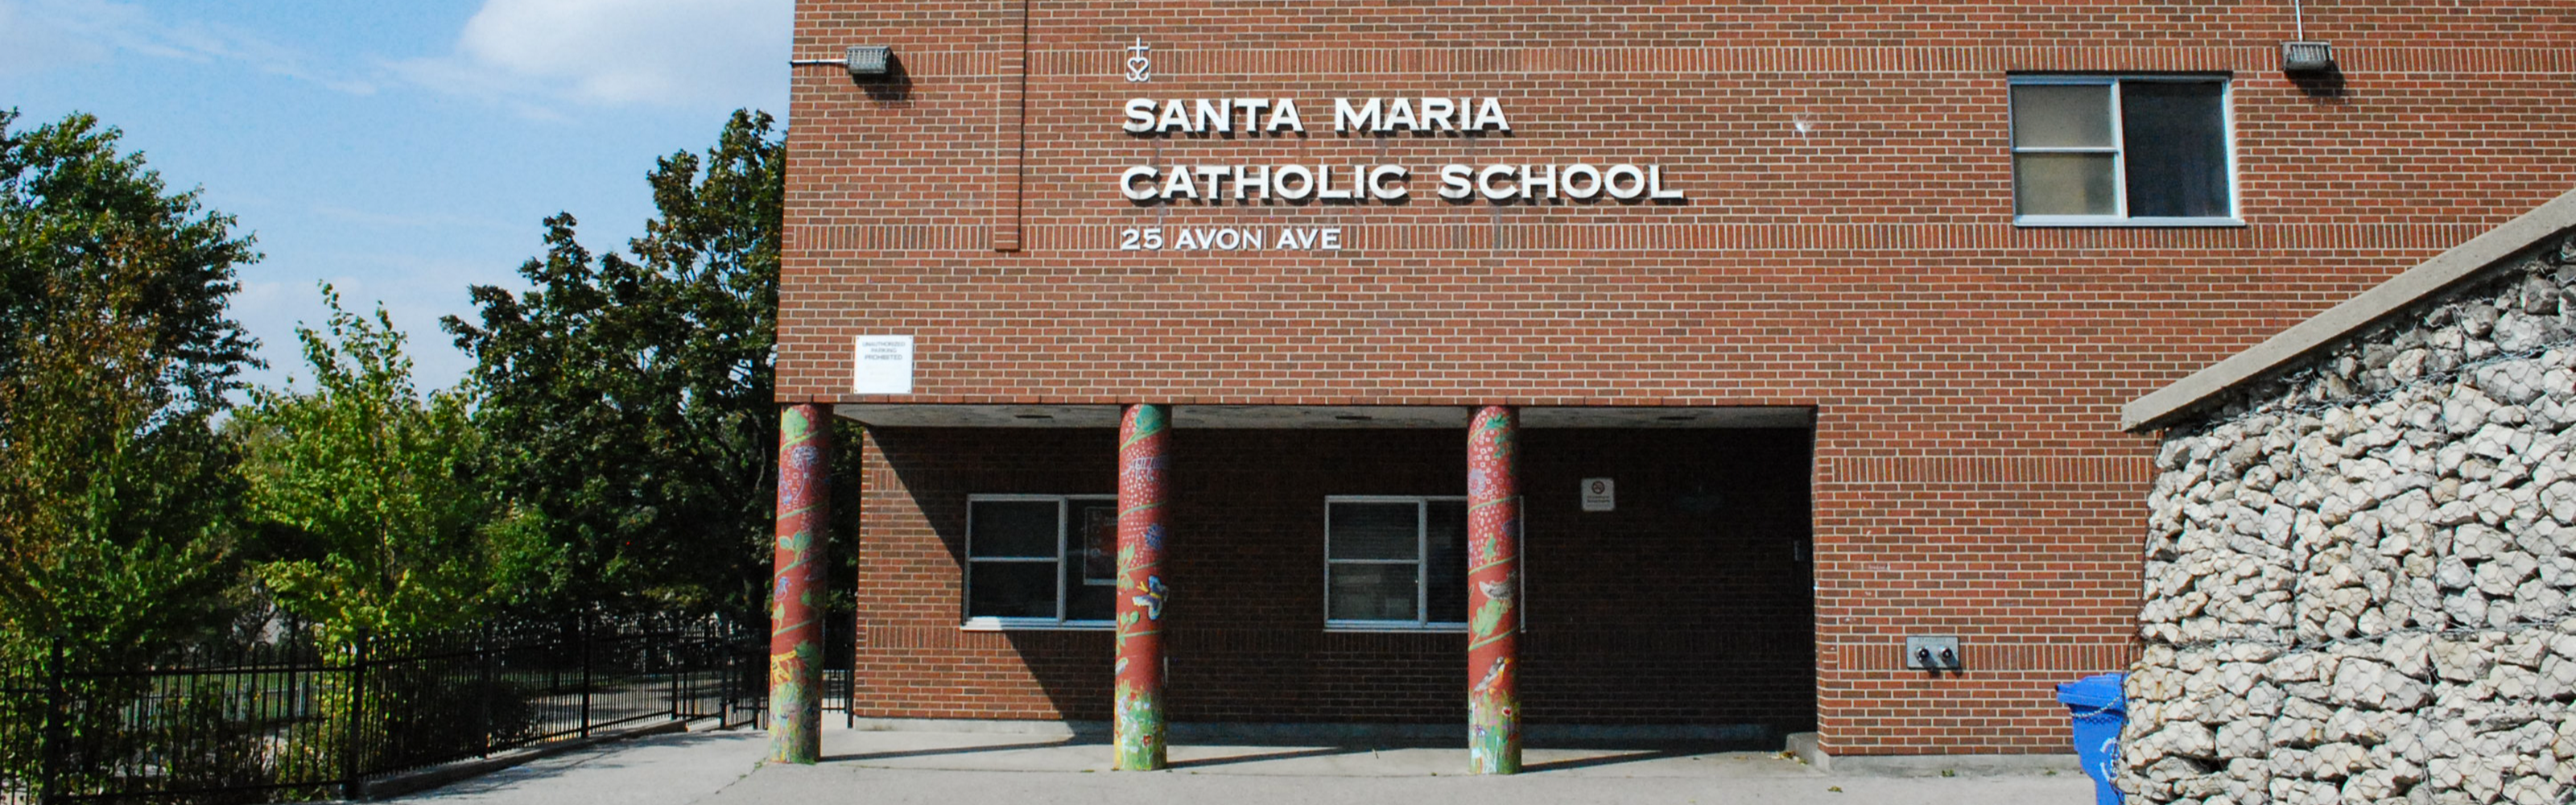 The front of the  Santa Maria Catholic School building.